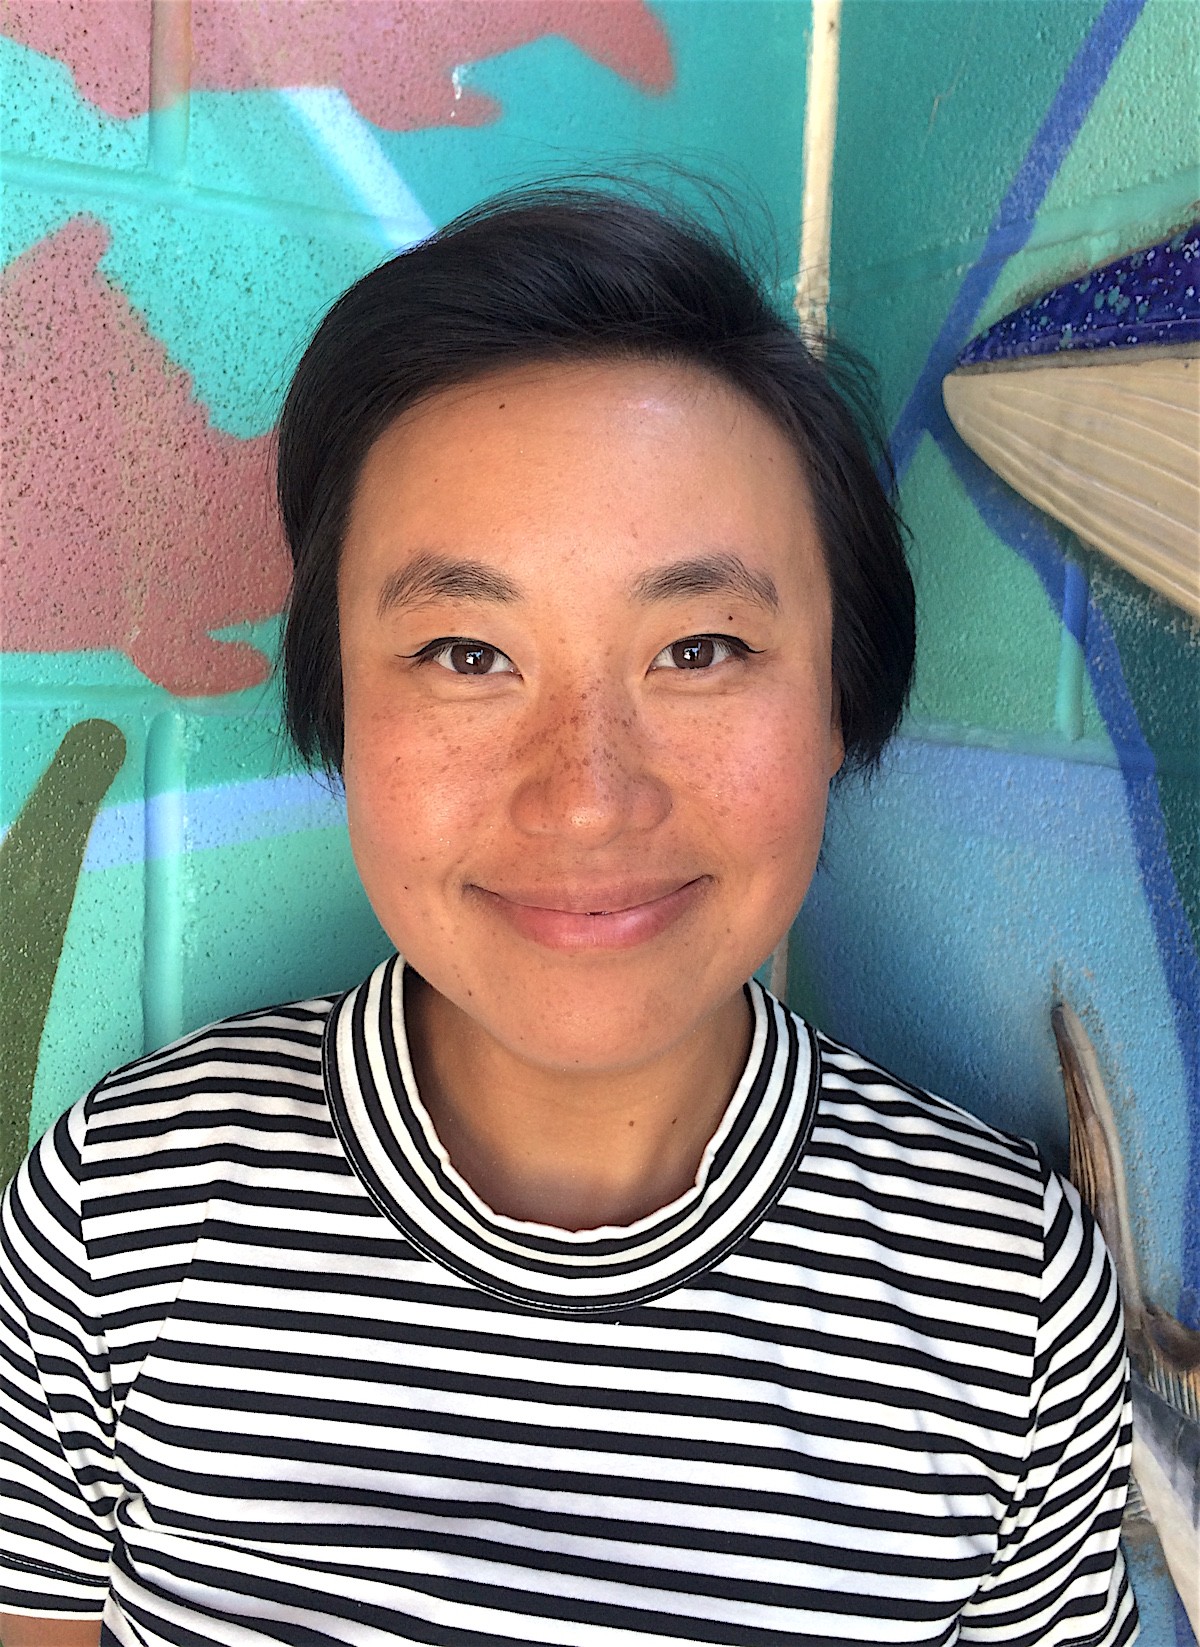 Lynn is centered in the cropped photograph wearing a blue and white horizontal striped shirt with a mock collar. She is smiling and in front of a brightly-painted brick wall.